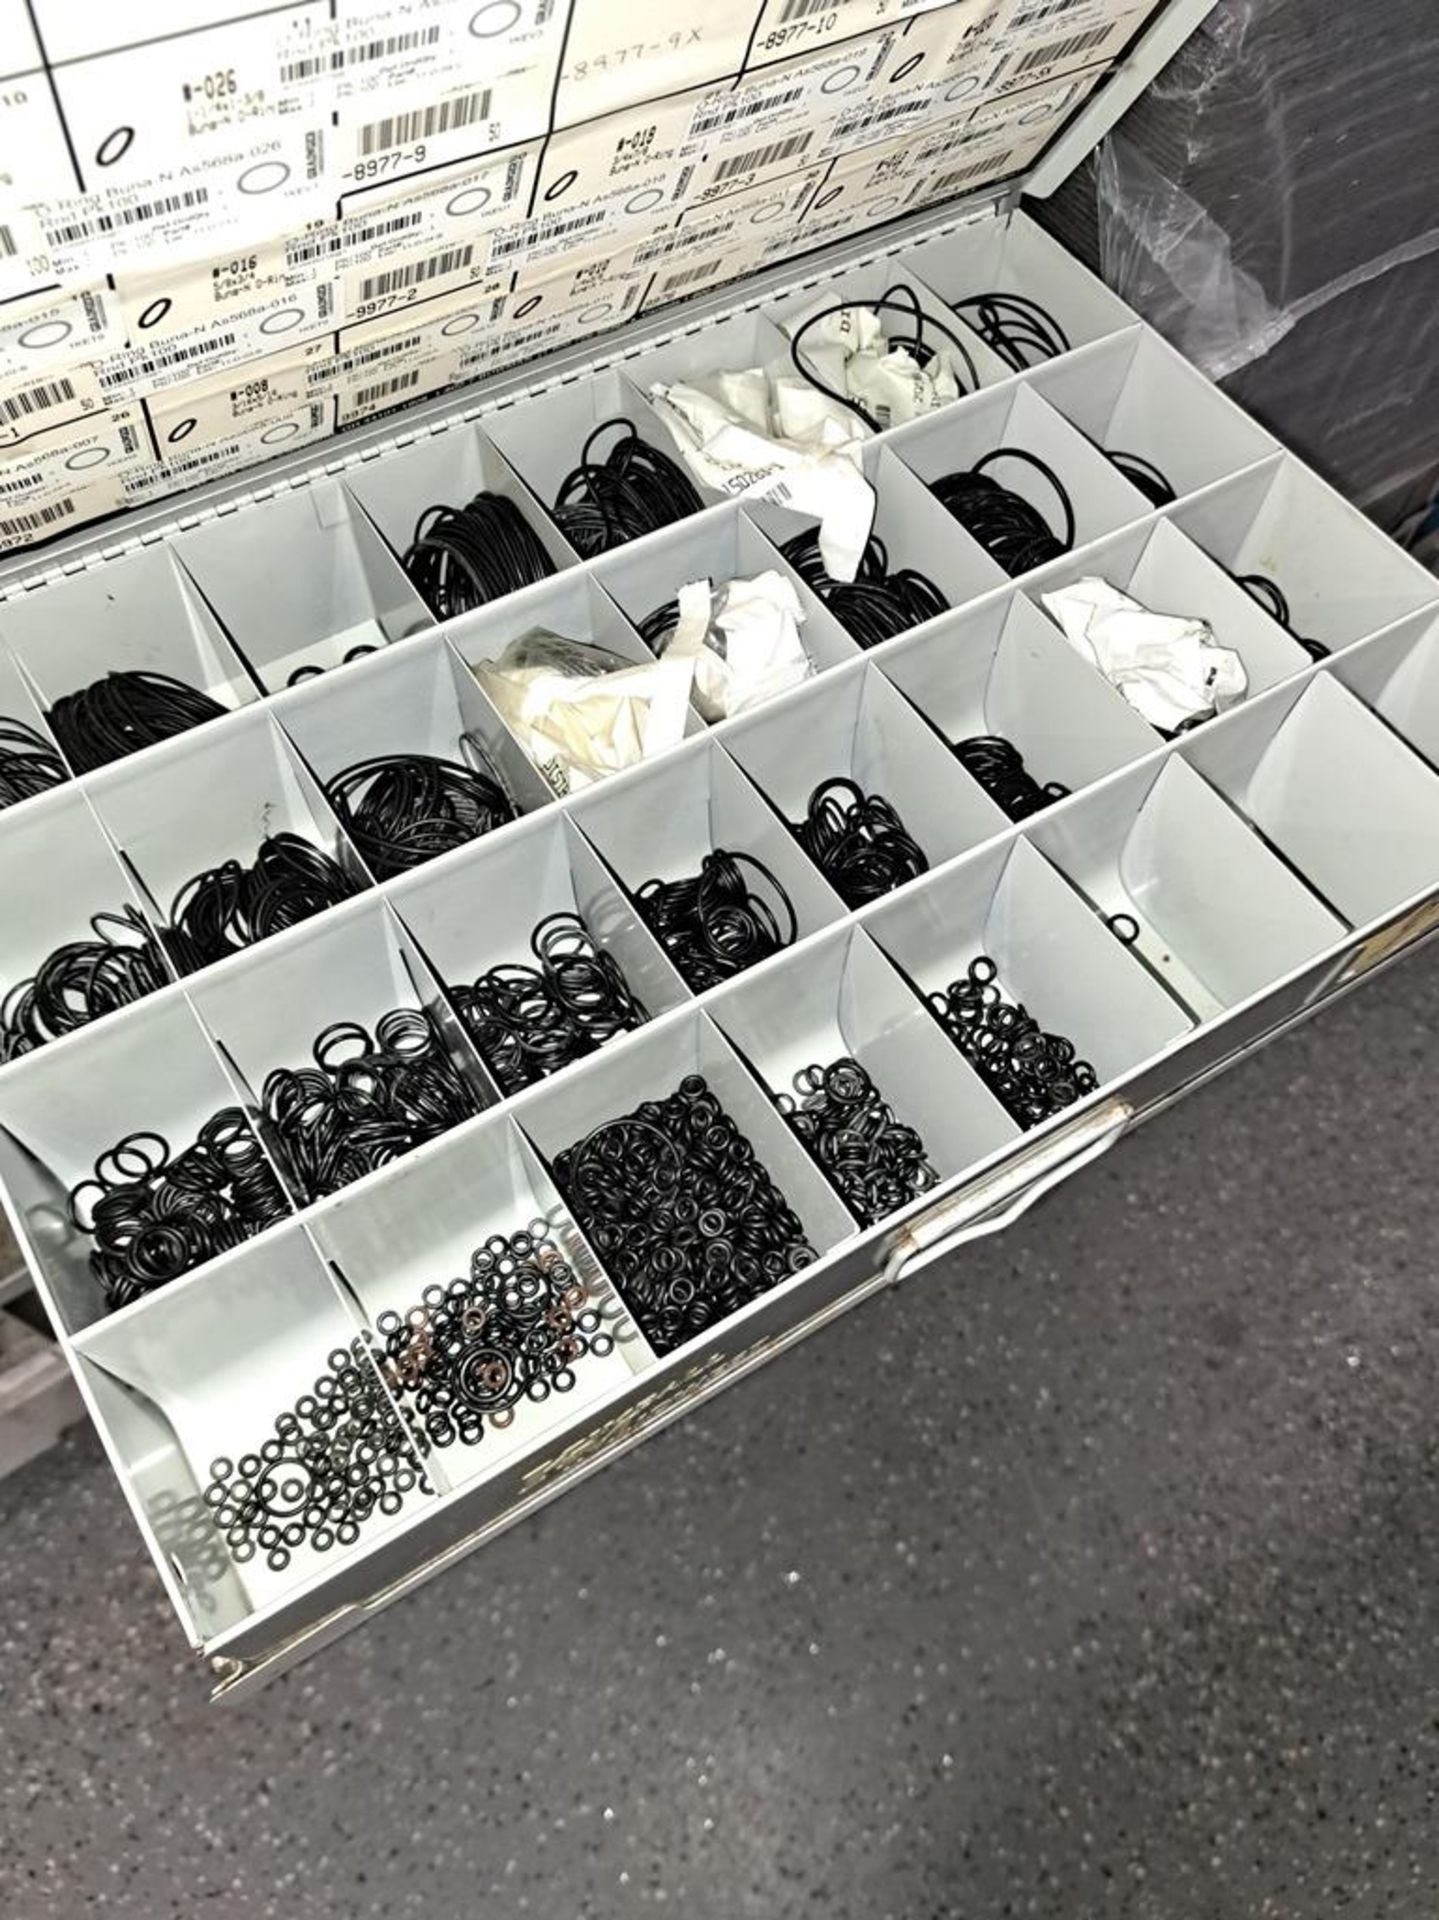 Lot (5) Sets Kimball Midwest Parts Drawers: O-Rings, Screws, Bolts, Set Screws, Fittings, etc.- - Image 4 of 10